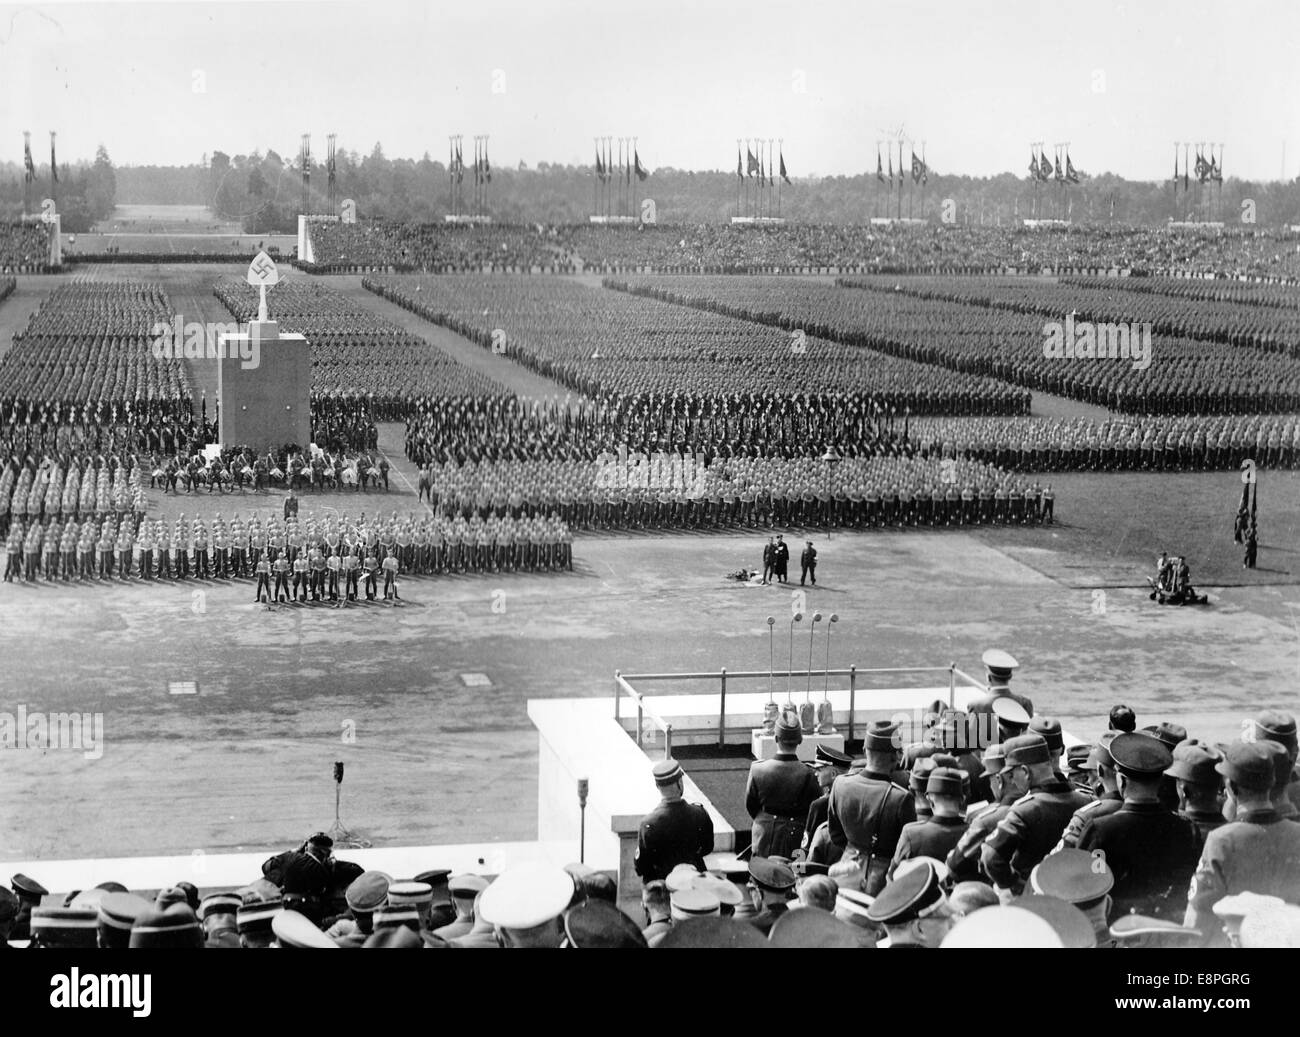 Nuremberg Rally 1936 in Nuremberg, Germany - Roll call of the Reich Labour Service (RAD) in front of the grandstand on Zeppelin Field at the Nazi party rally grounds. (Flaws in quality due to the historic picture copy) Fotoarchiv für Zeitgeschichtee - NO WIRE SERVICE - Stock Photo